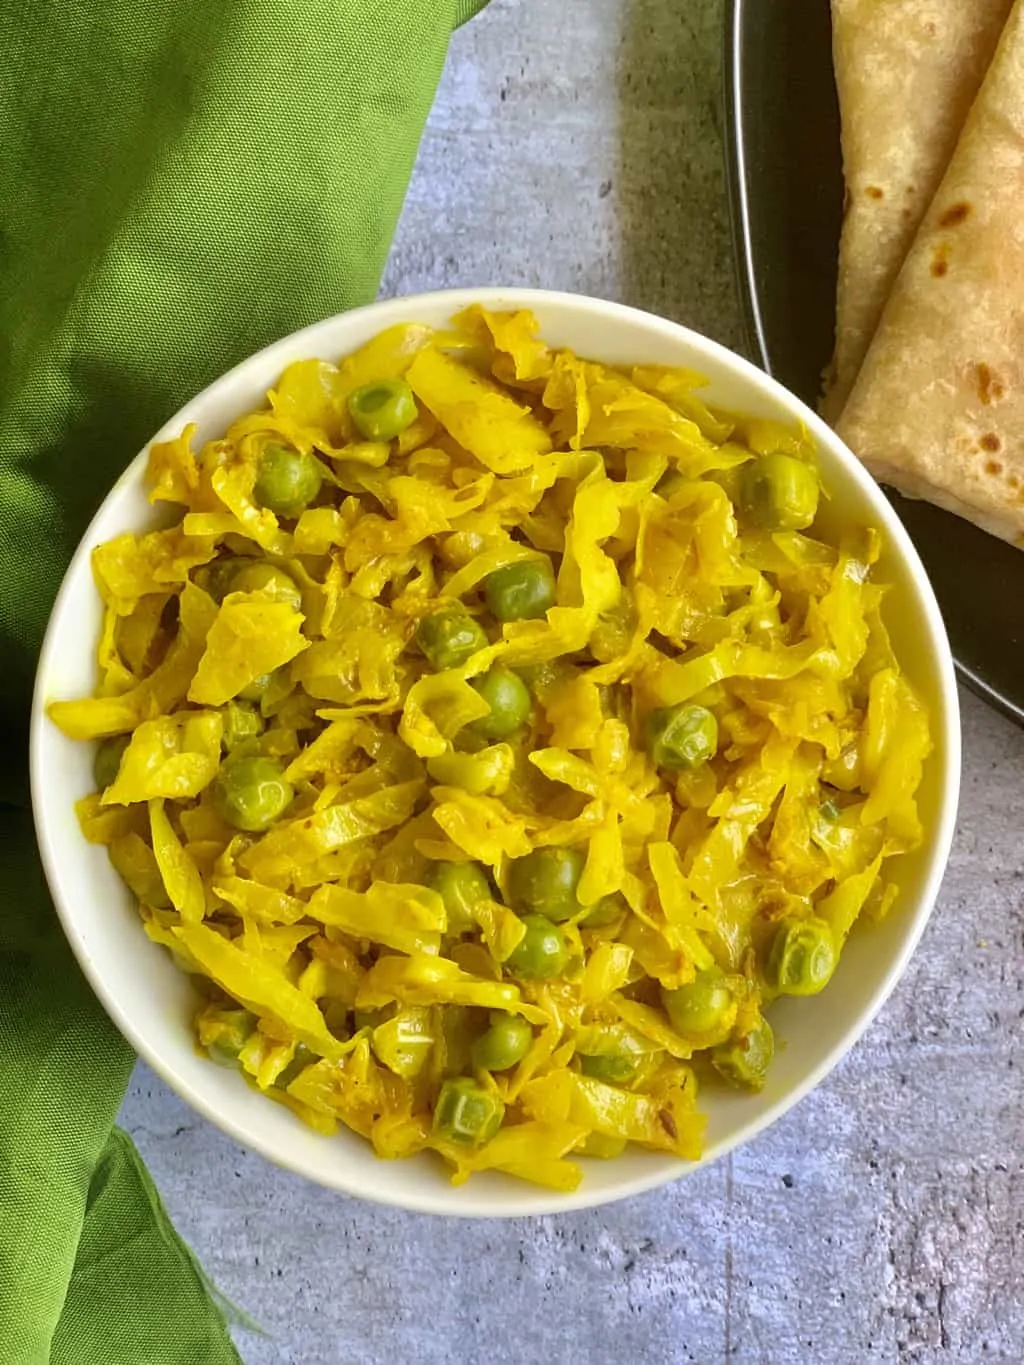 Cabbage Peas Stir Fry served in a bowl with chapati on the side